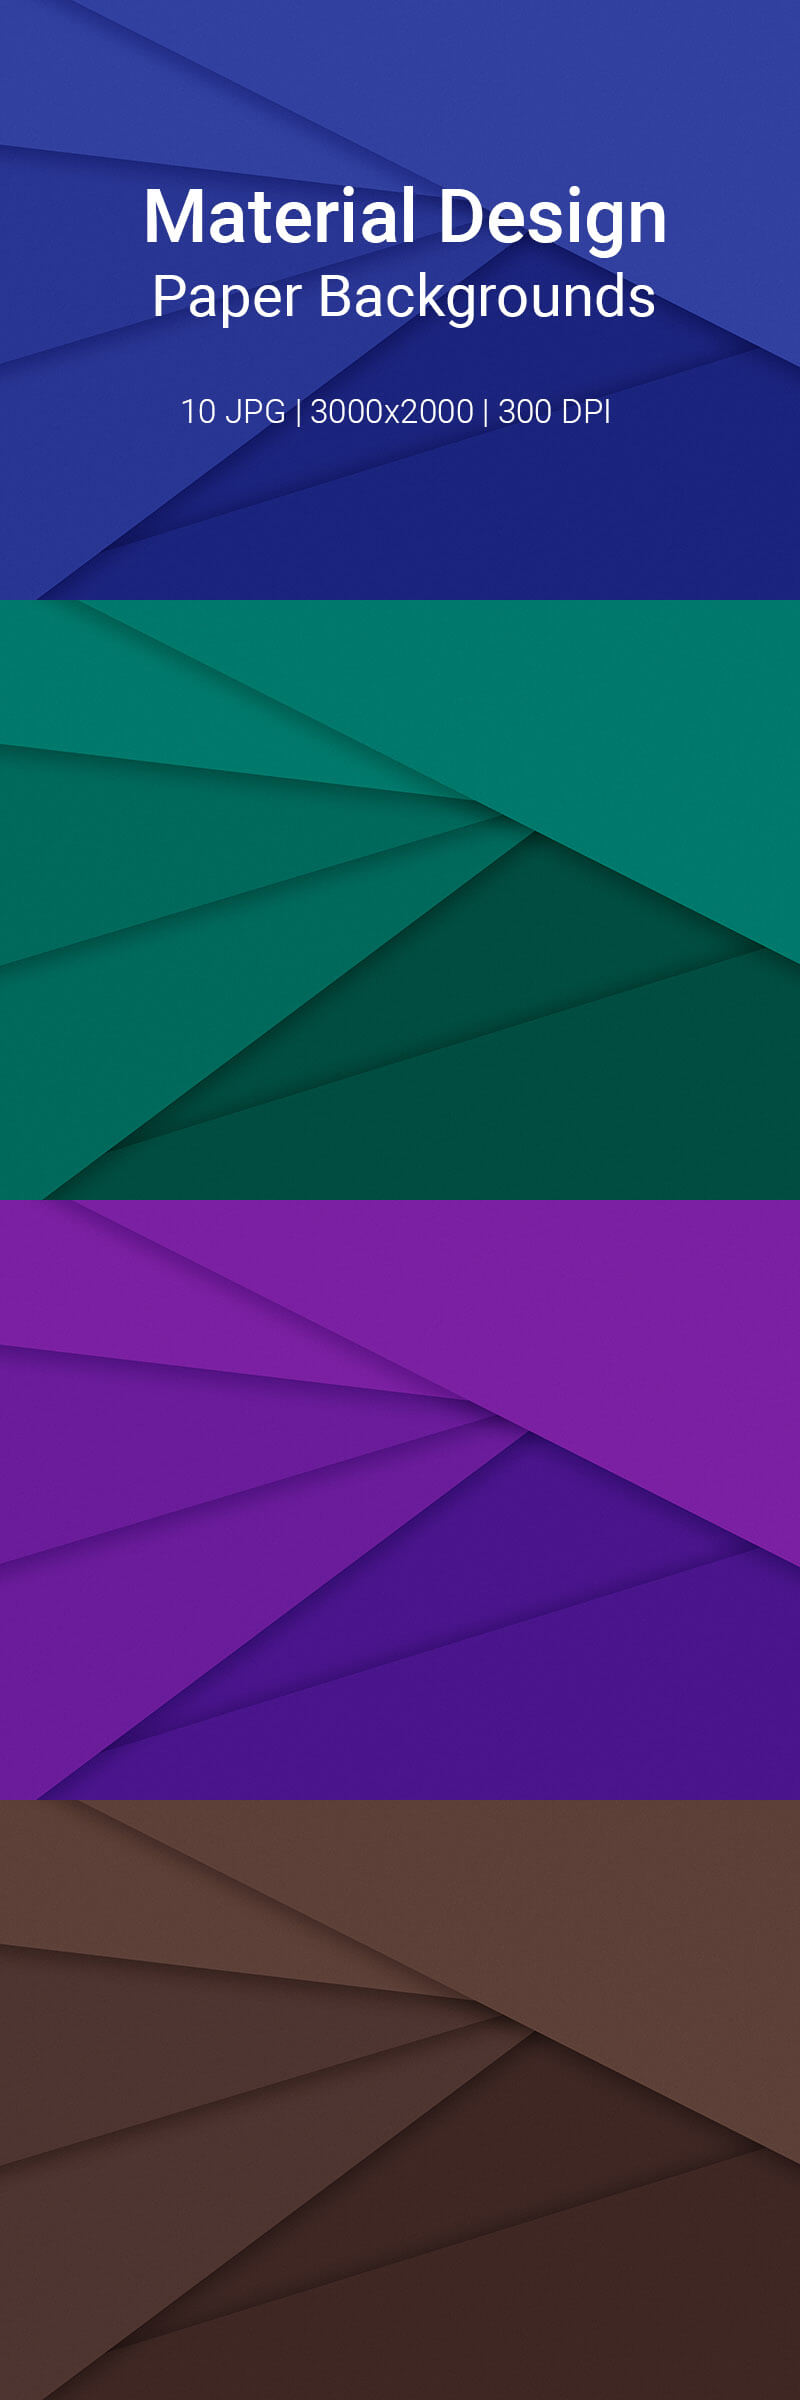 Material Design Paper Backgrounds